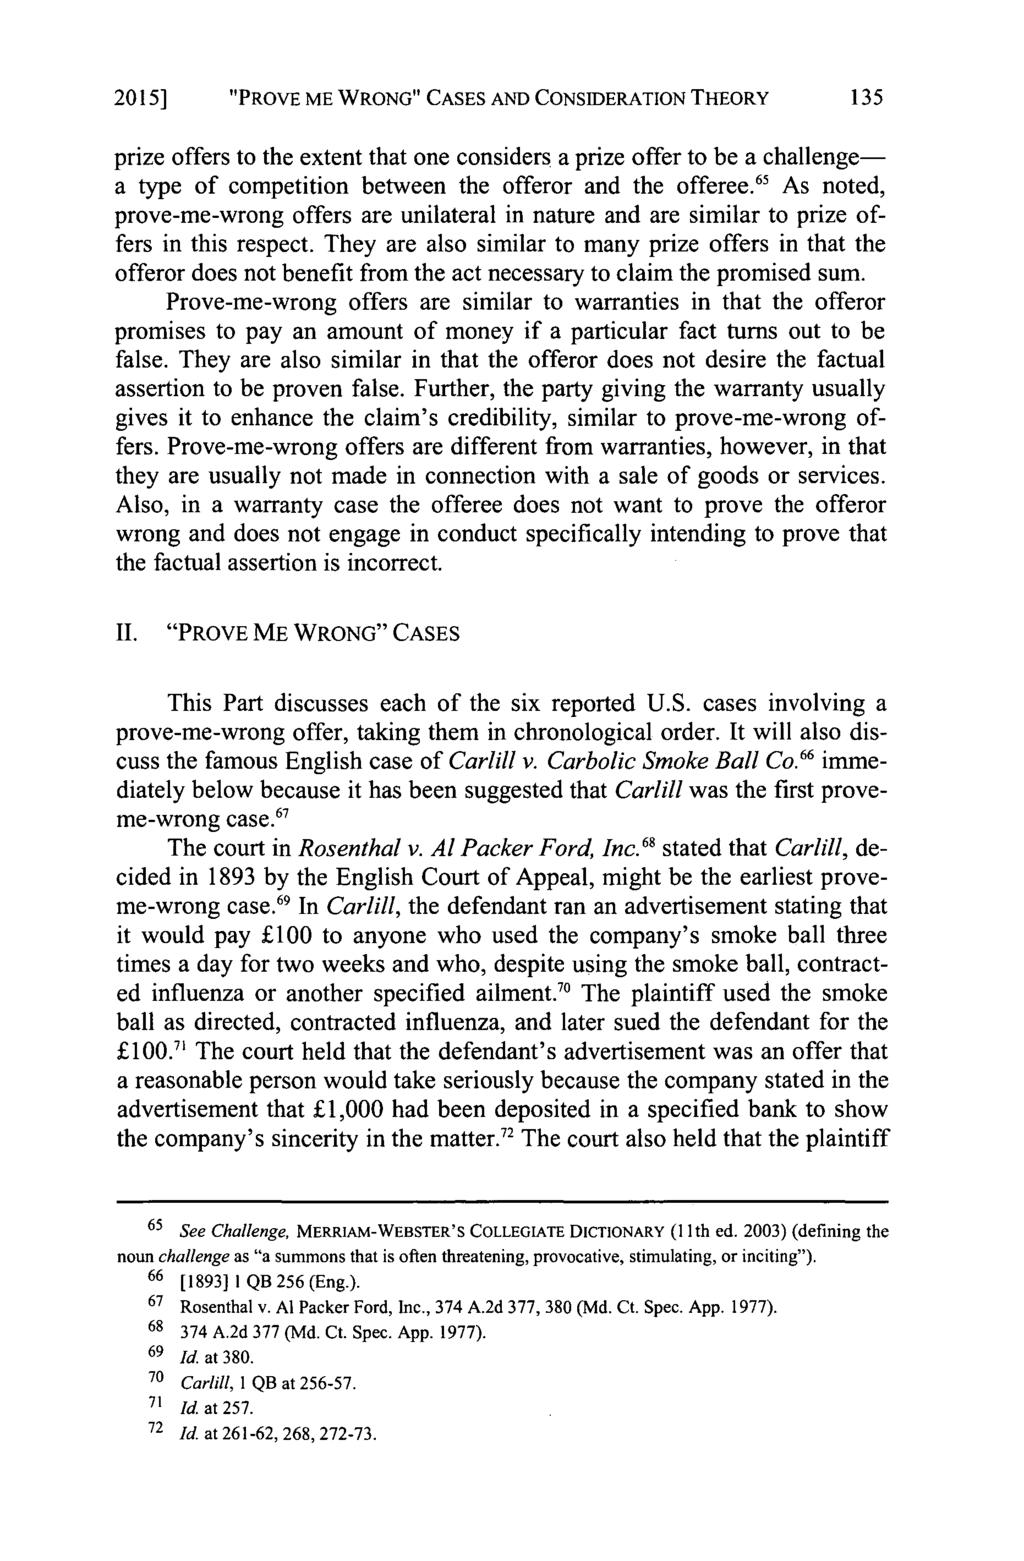 2015] "PROVE ME WRONG" CASES AND CONSIDERATION THEORY 135 prize offers to the extent that one considers a prize offer to be a challengea type of competition between the offerer and the offeree.